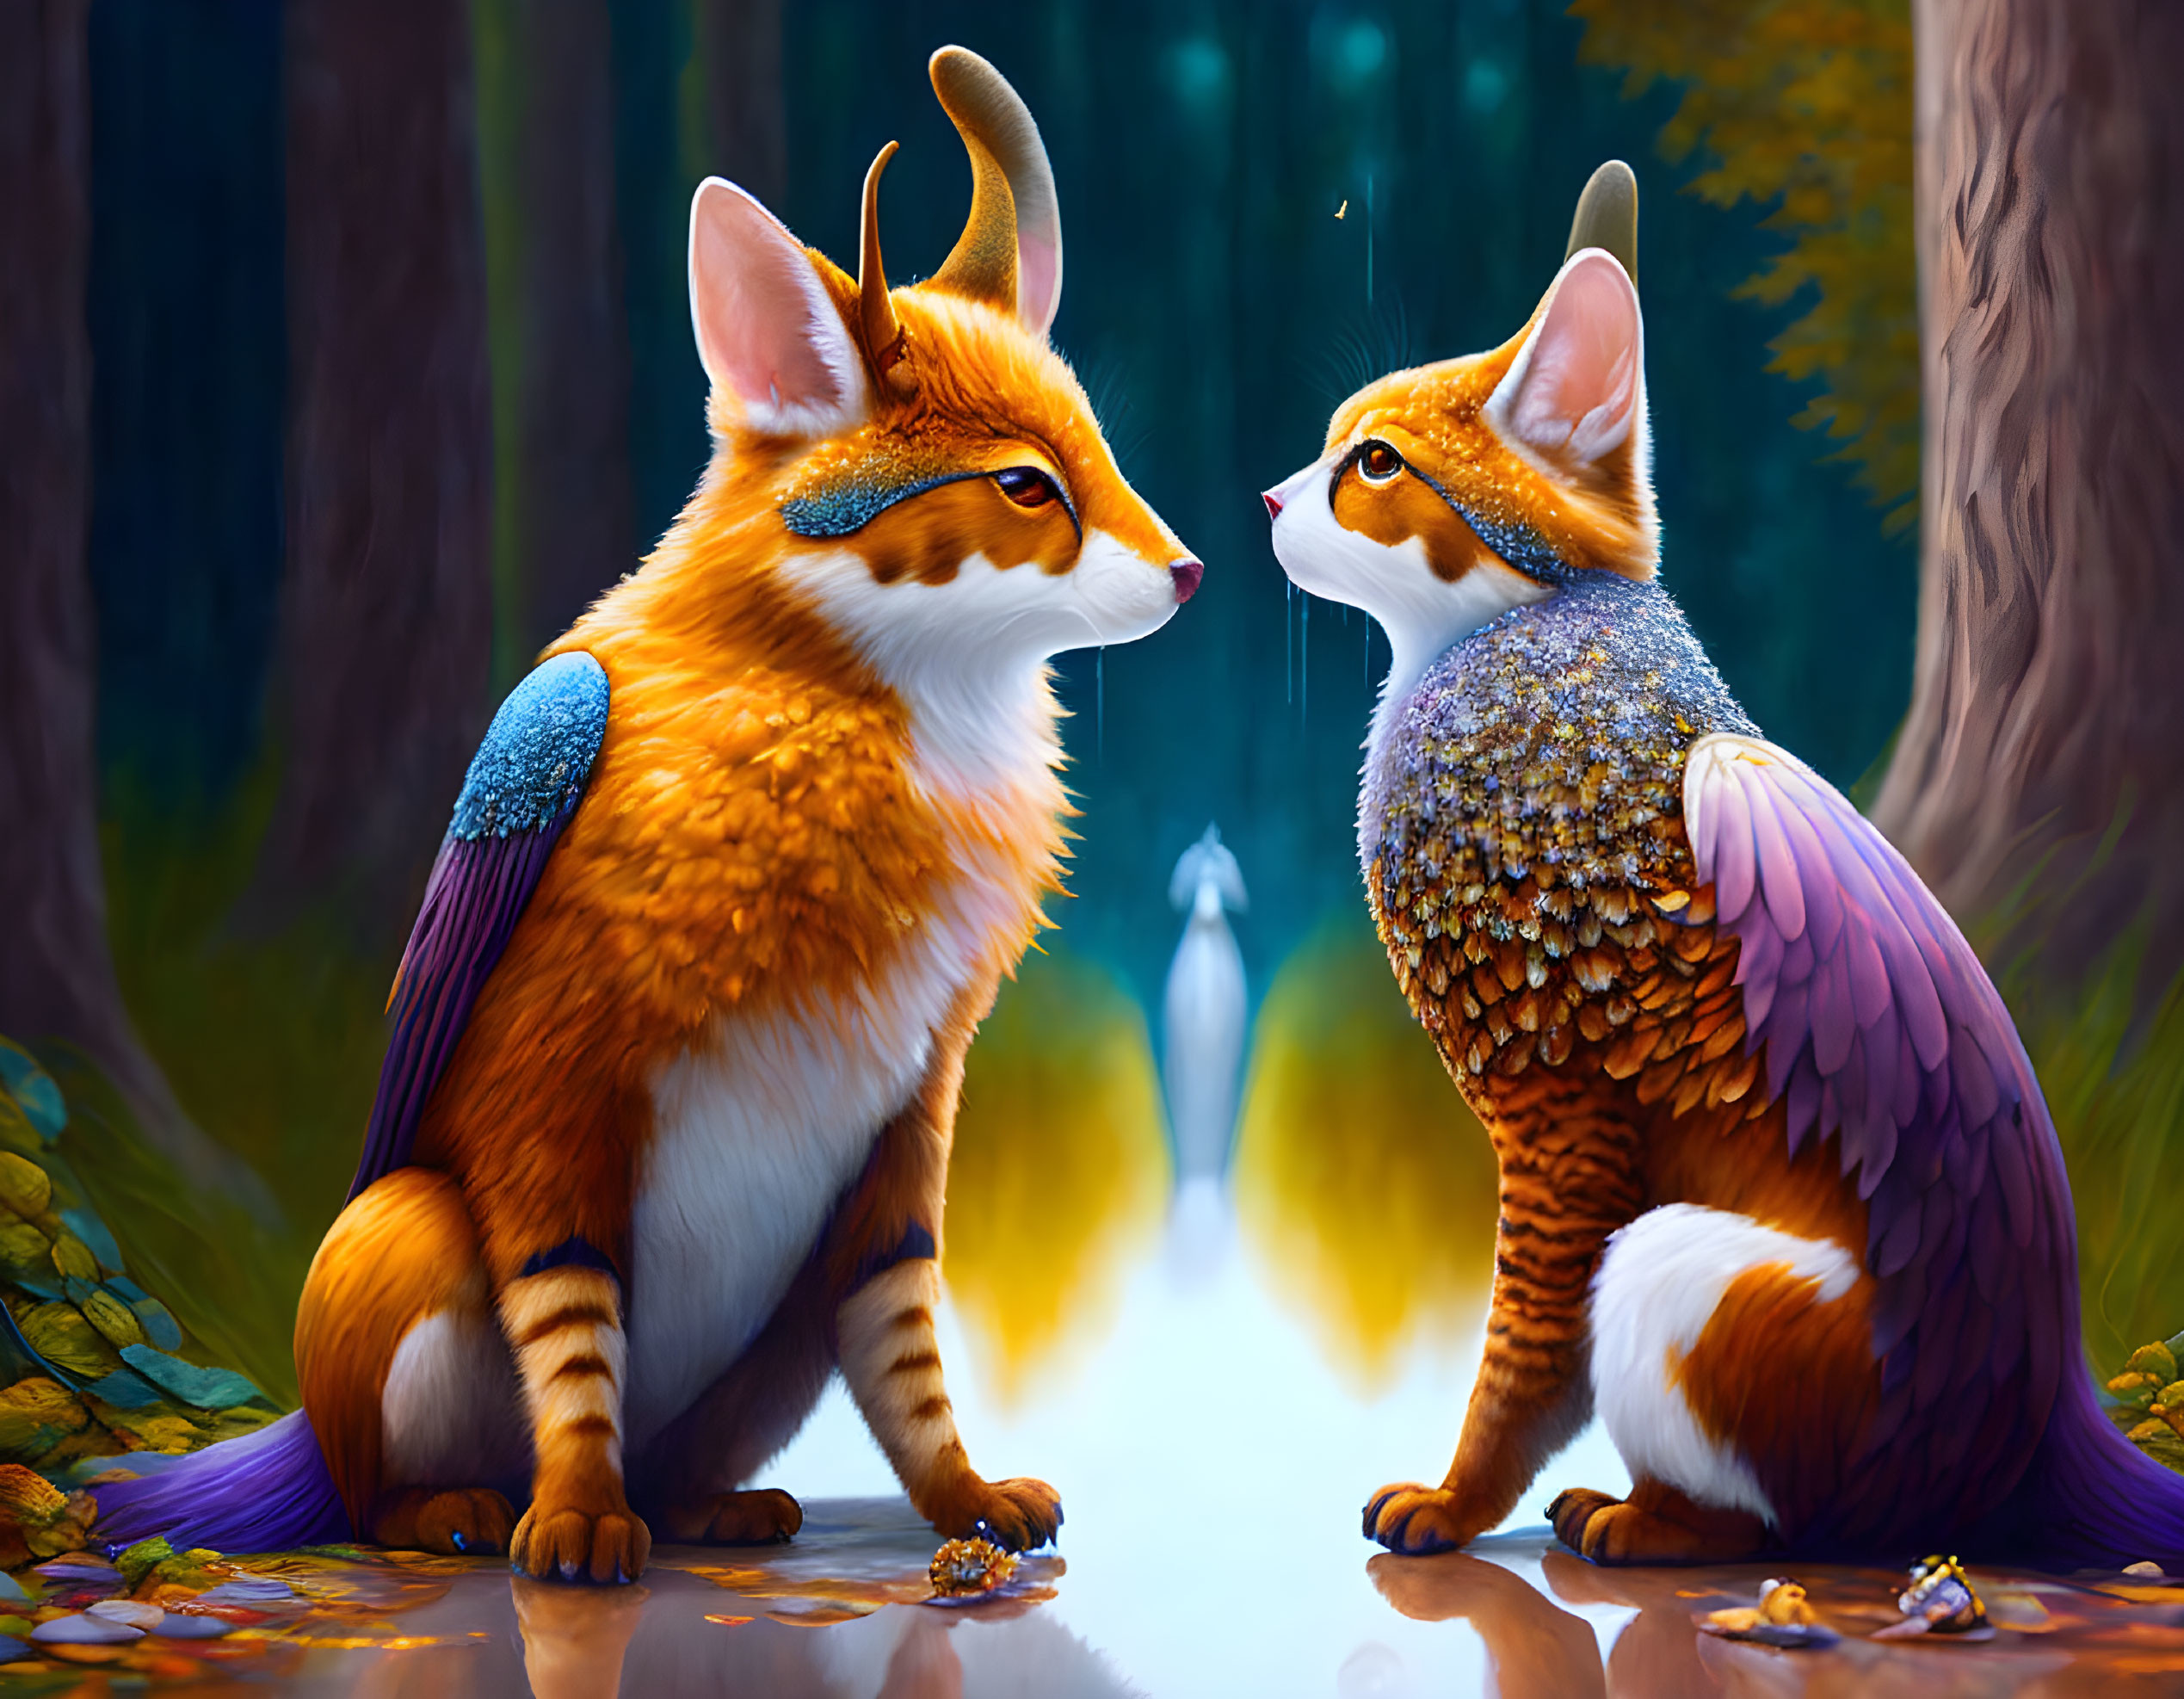 Vibrant orange fantasy foxes with colorful wings in enchanted forest